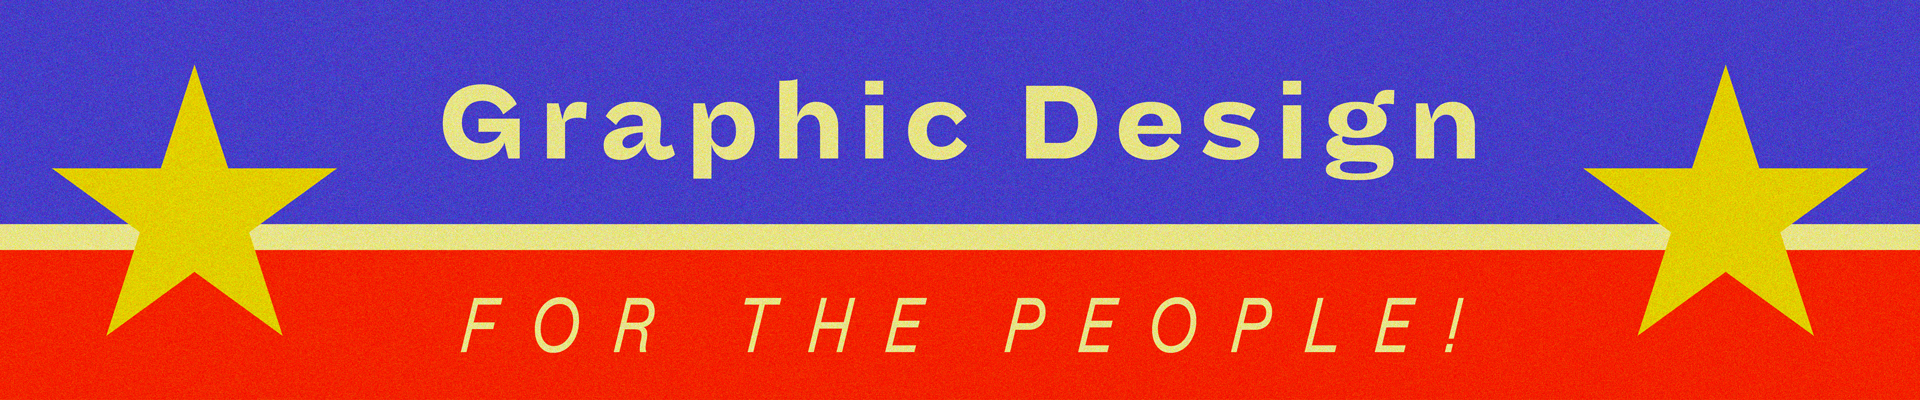 graphic design for the people